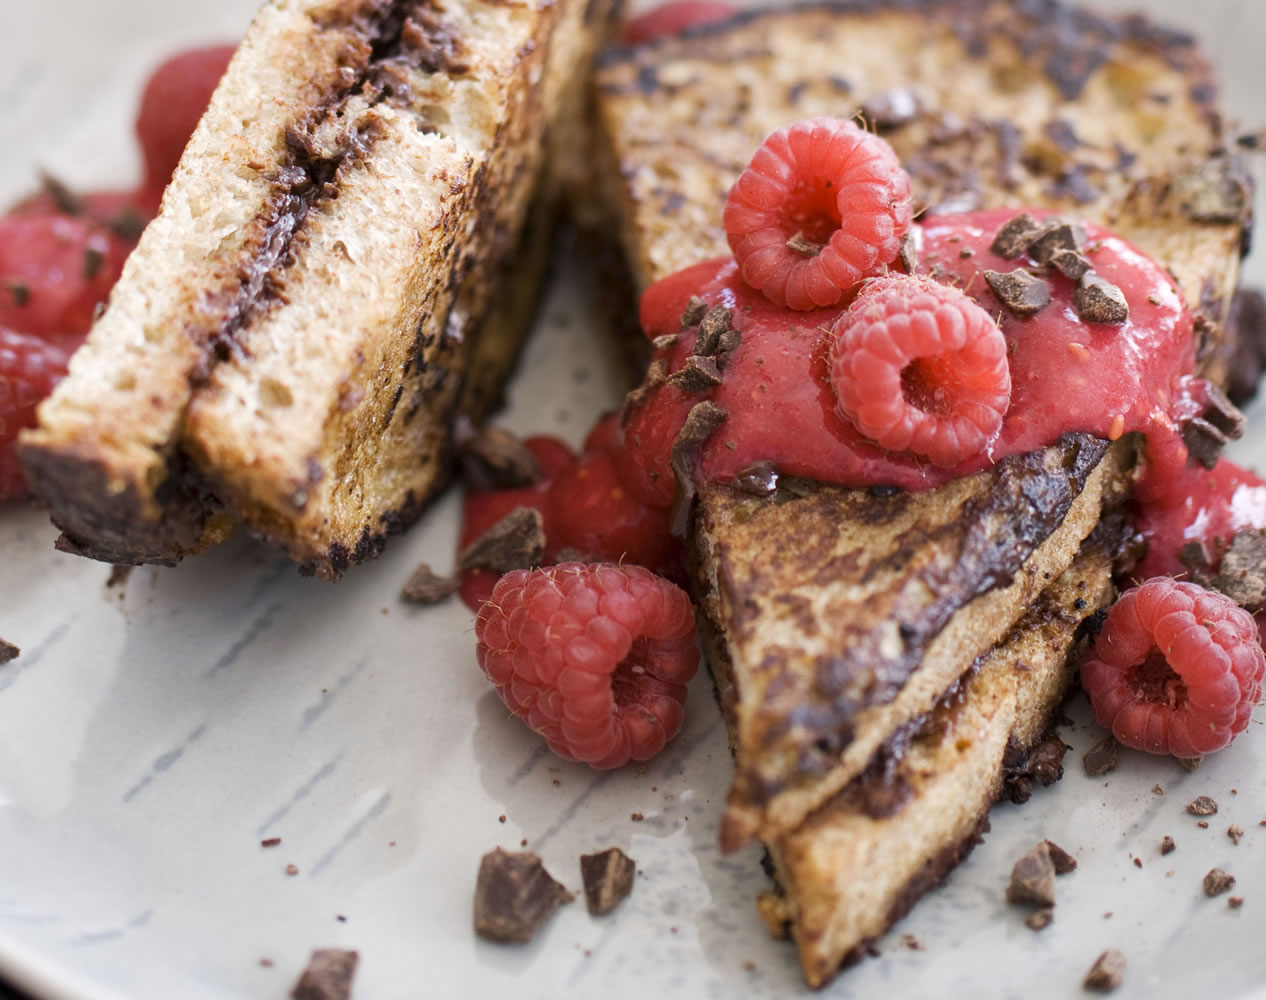 Chocolate-stuffed French toast with raspberry sauce is a nutritious and delicious dish for breakfast in bed.